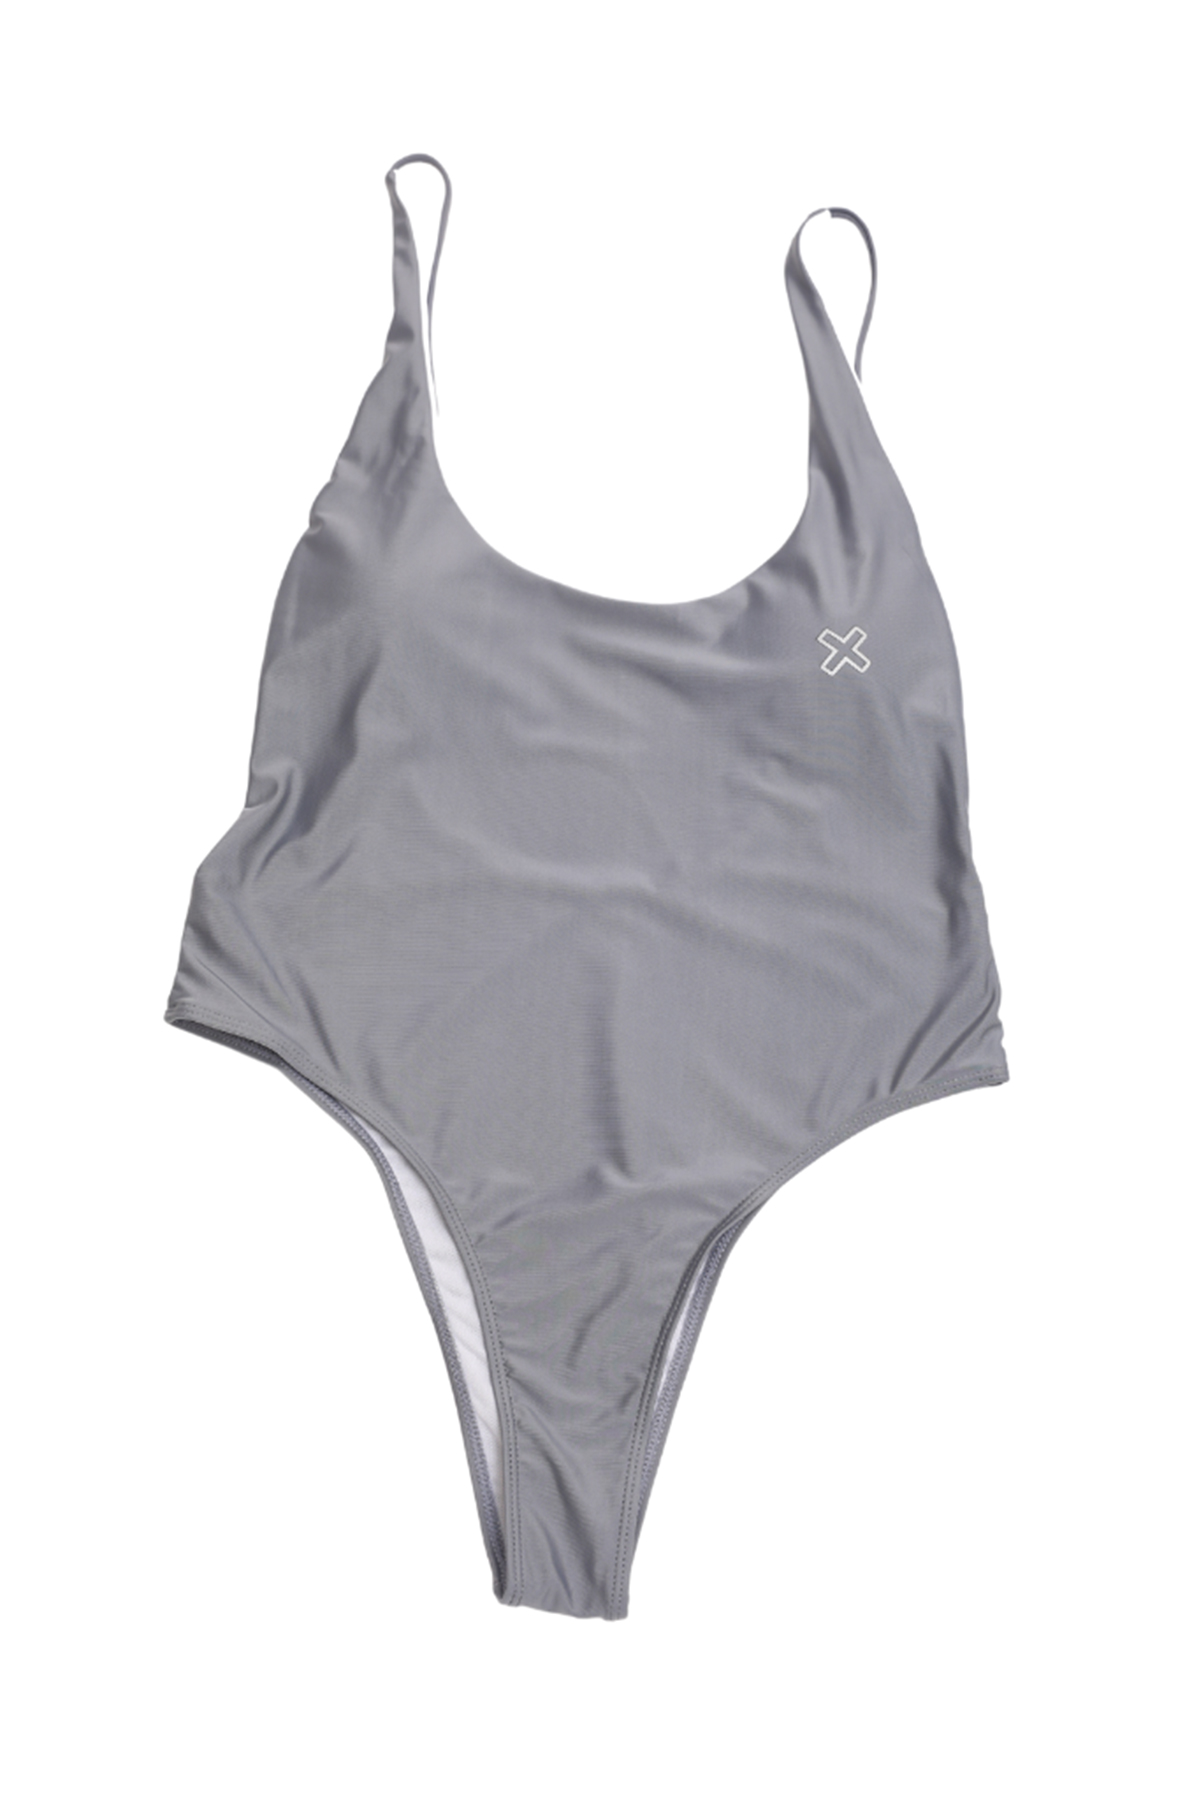 Time-Out-X-One-Piece-Bikini-Swimsuit—Grey—Front